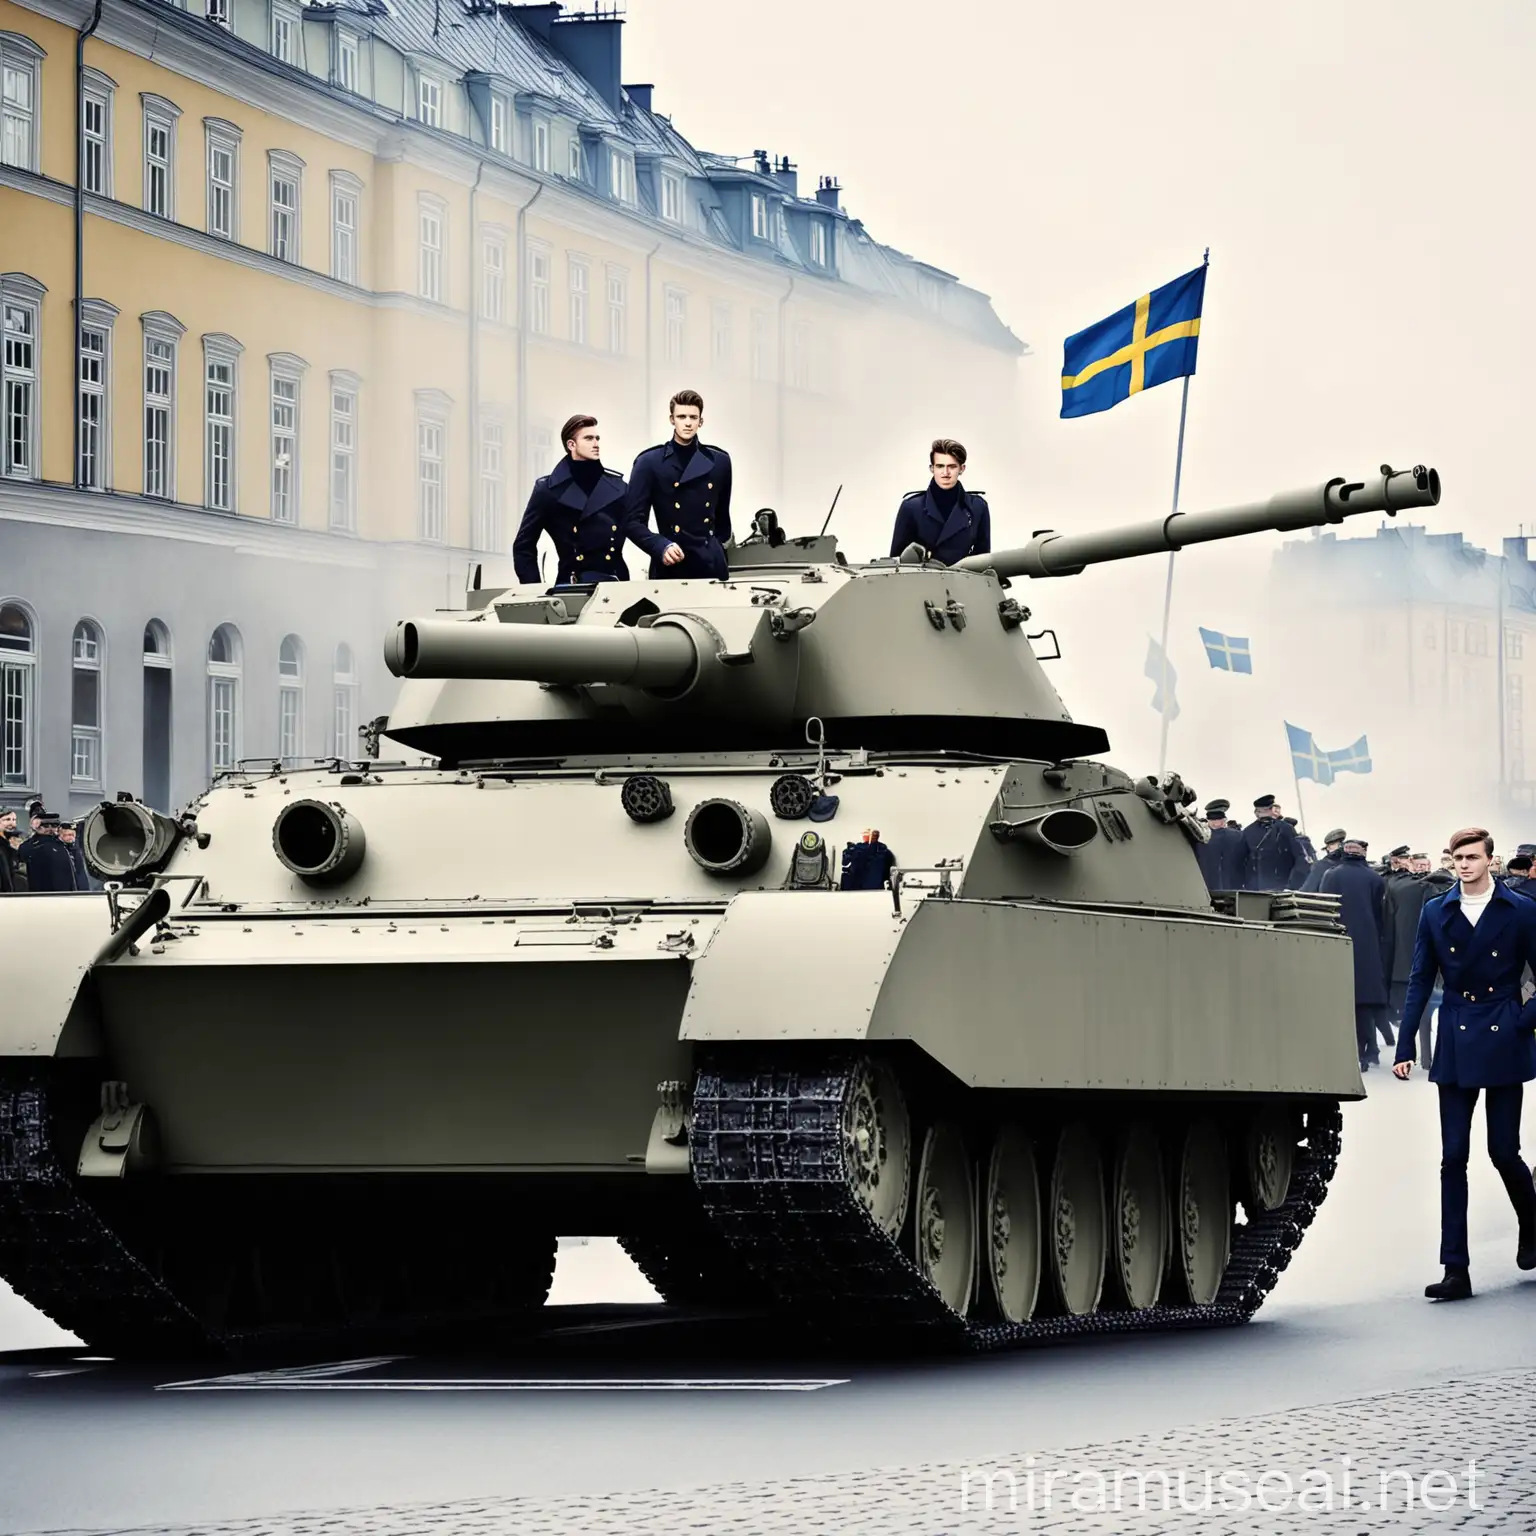 Tanks with the Swedish flag pass by.
The person in charge of this tank at the front is a handsome man in his 20s.
A handsome man in his 20s is wearing a navy trench coat.